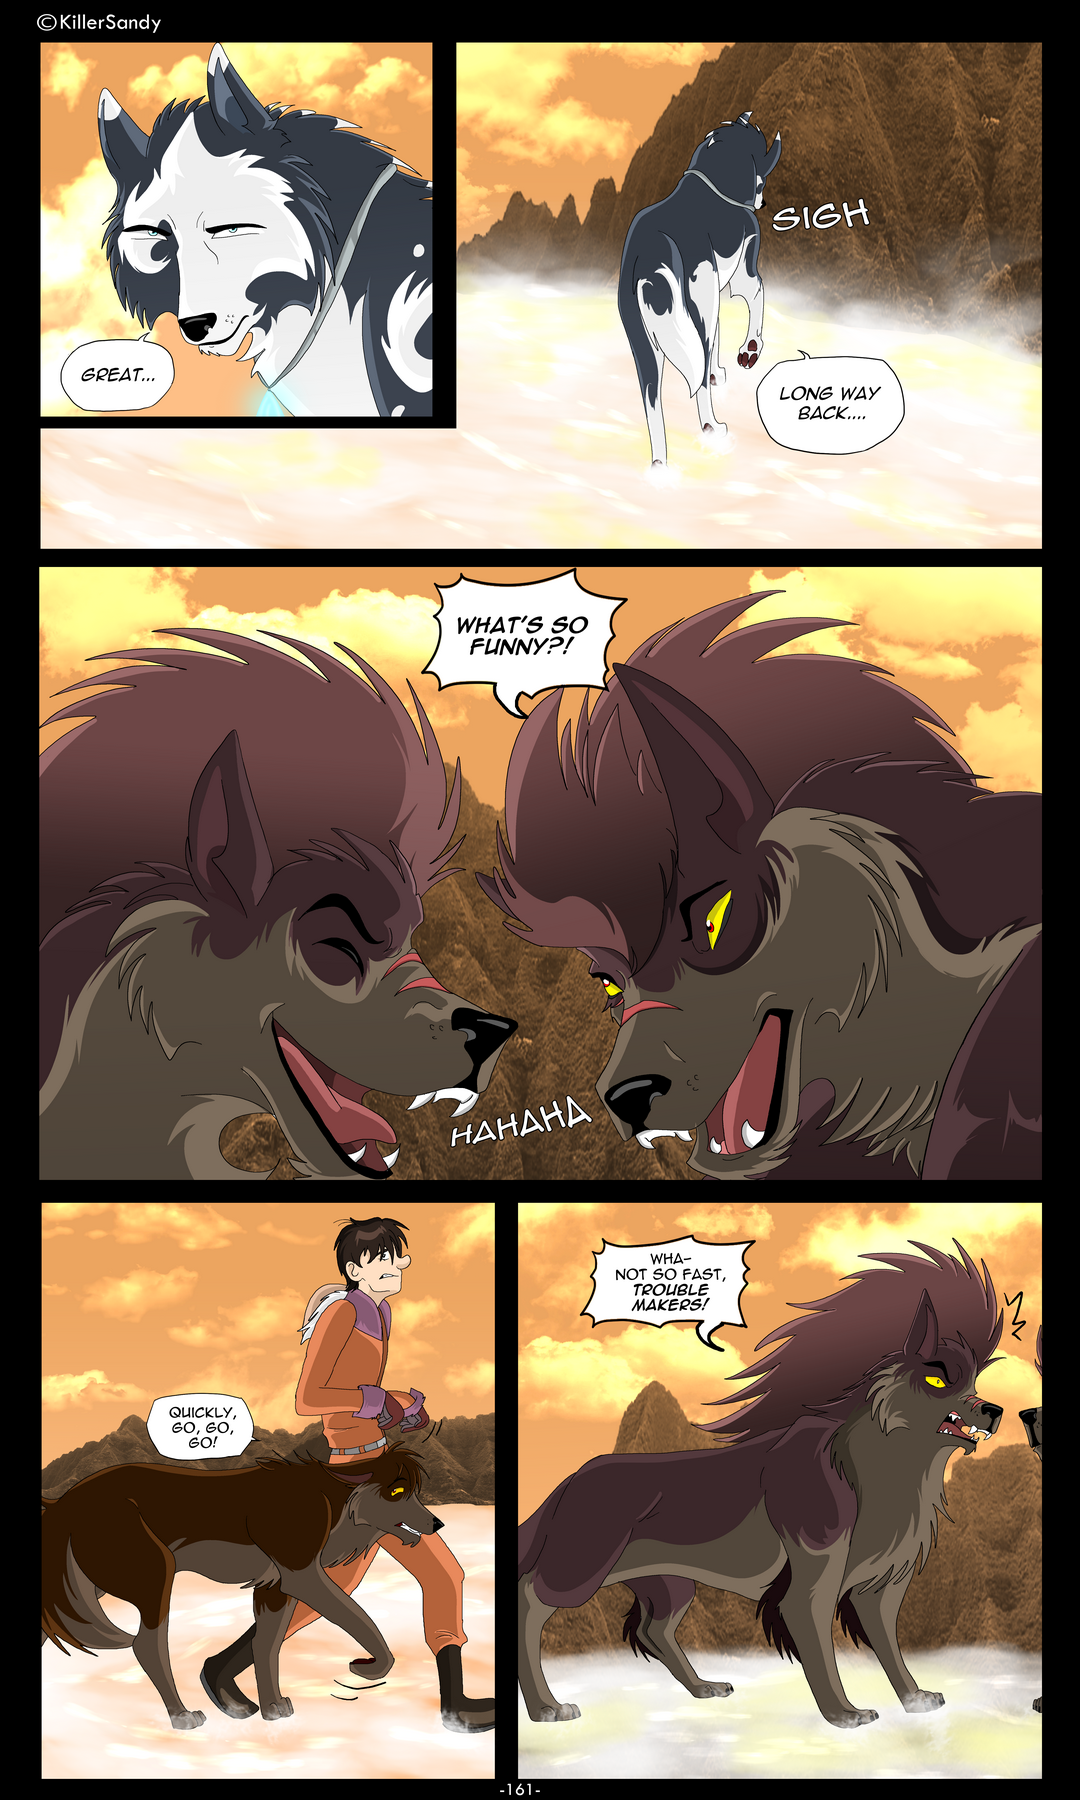 The Prince of the Moonlight Stone page 161